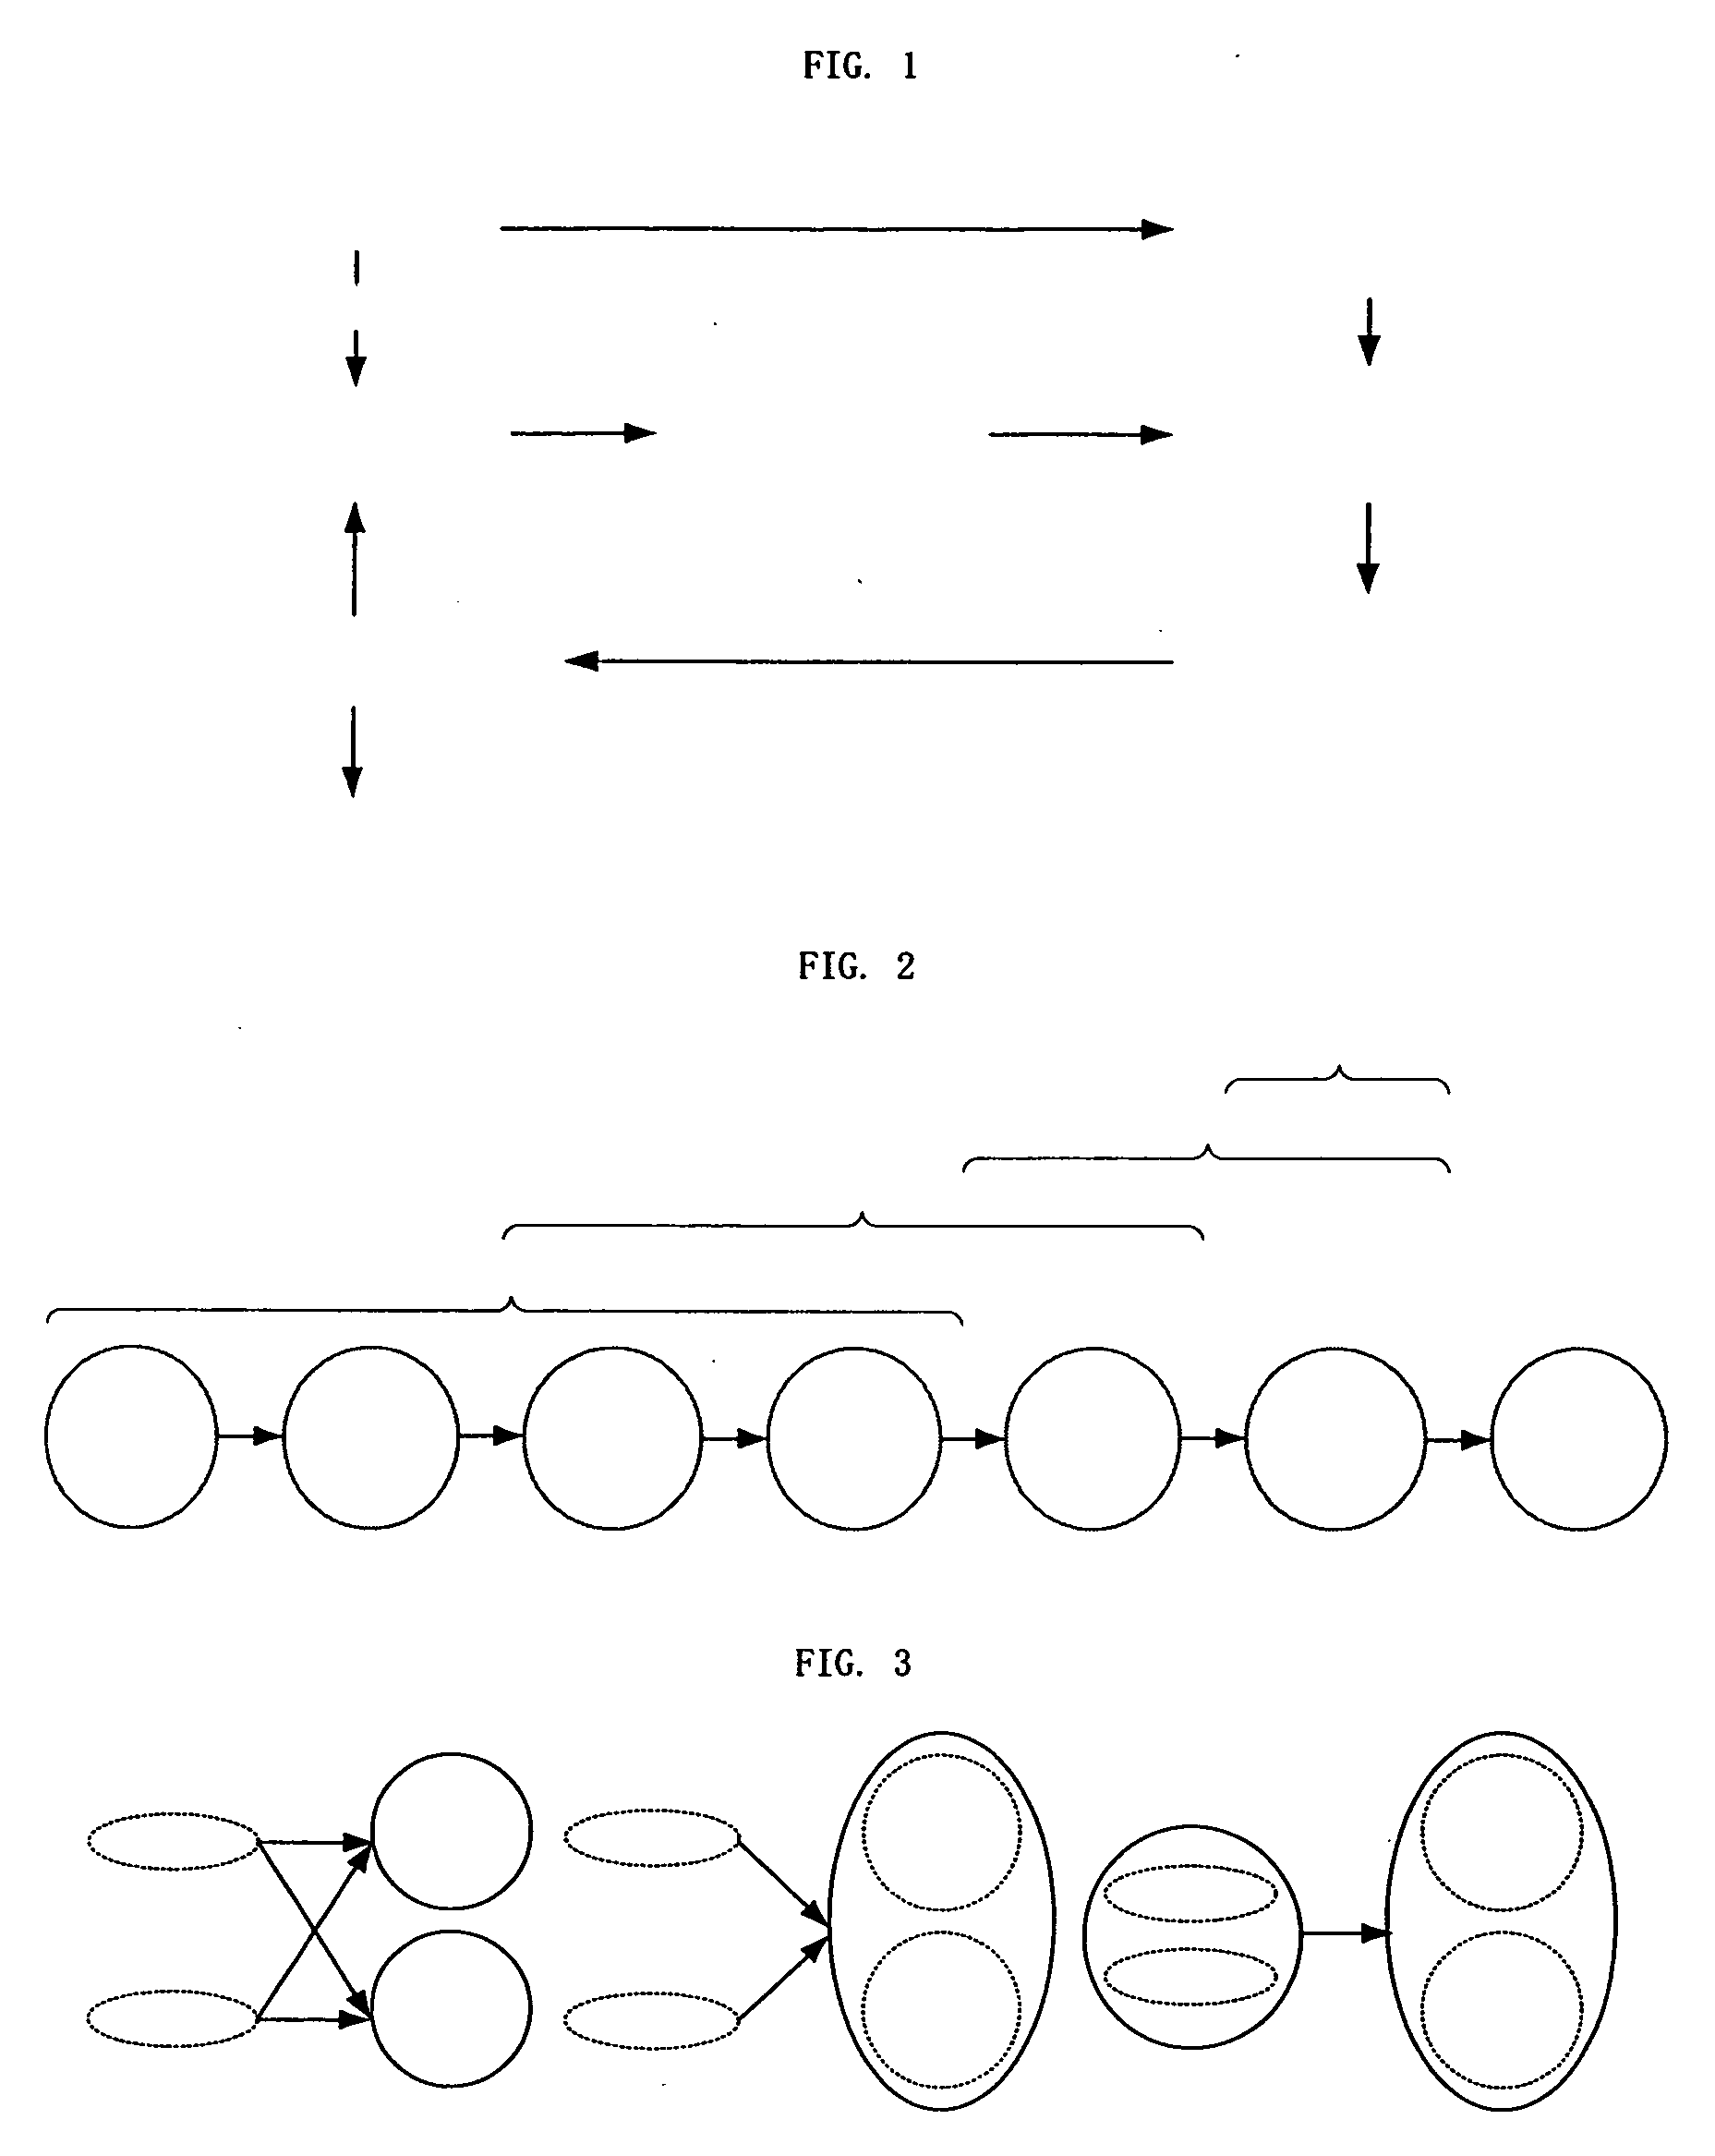 System and method for visually representing project metrics on 3-dimensional building models